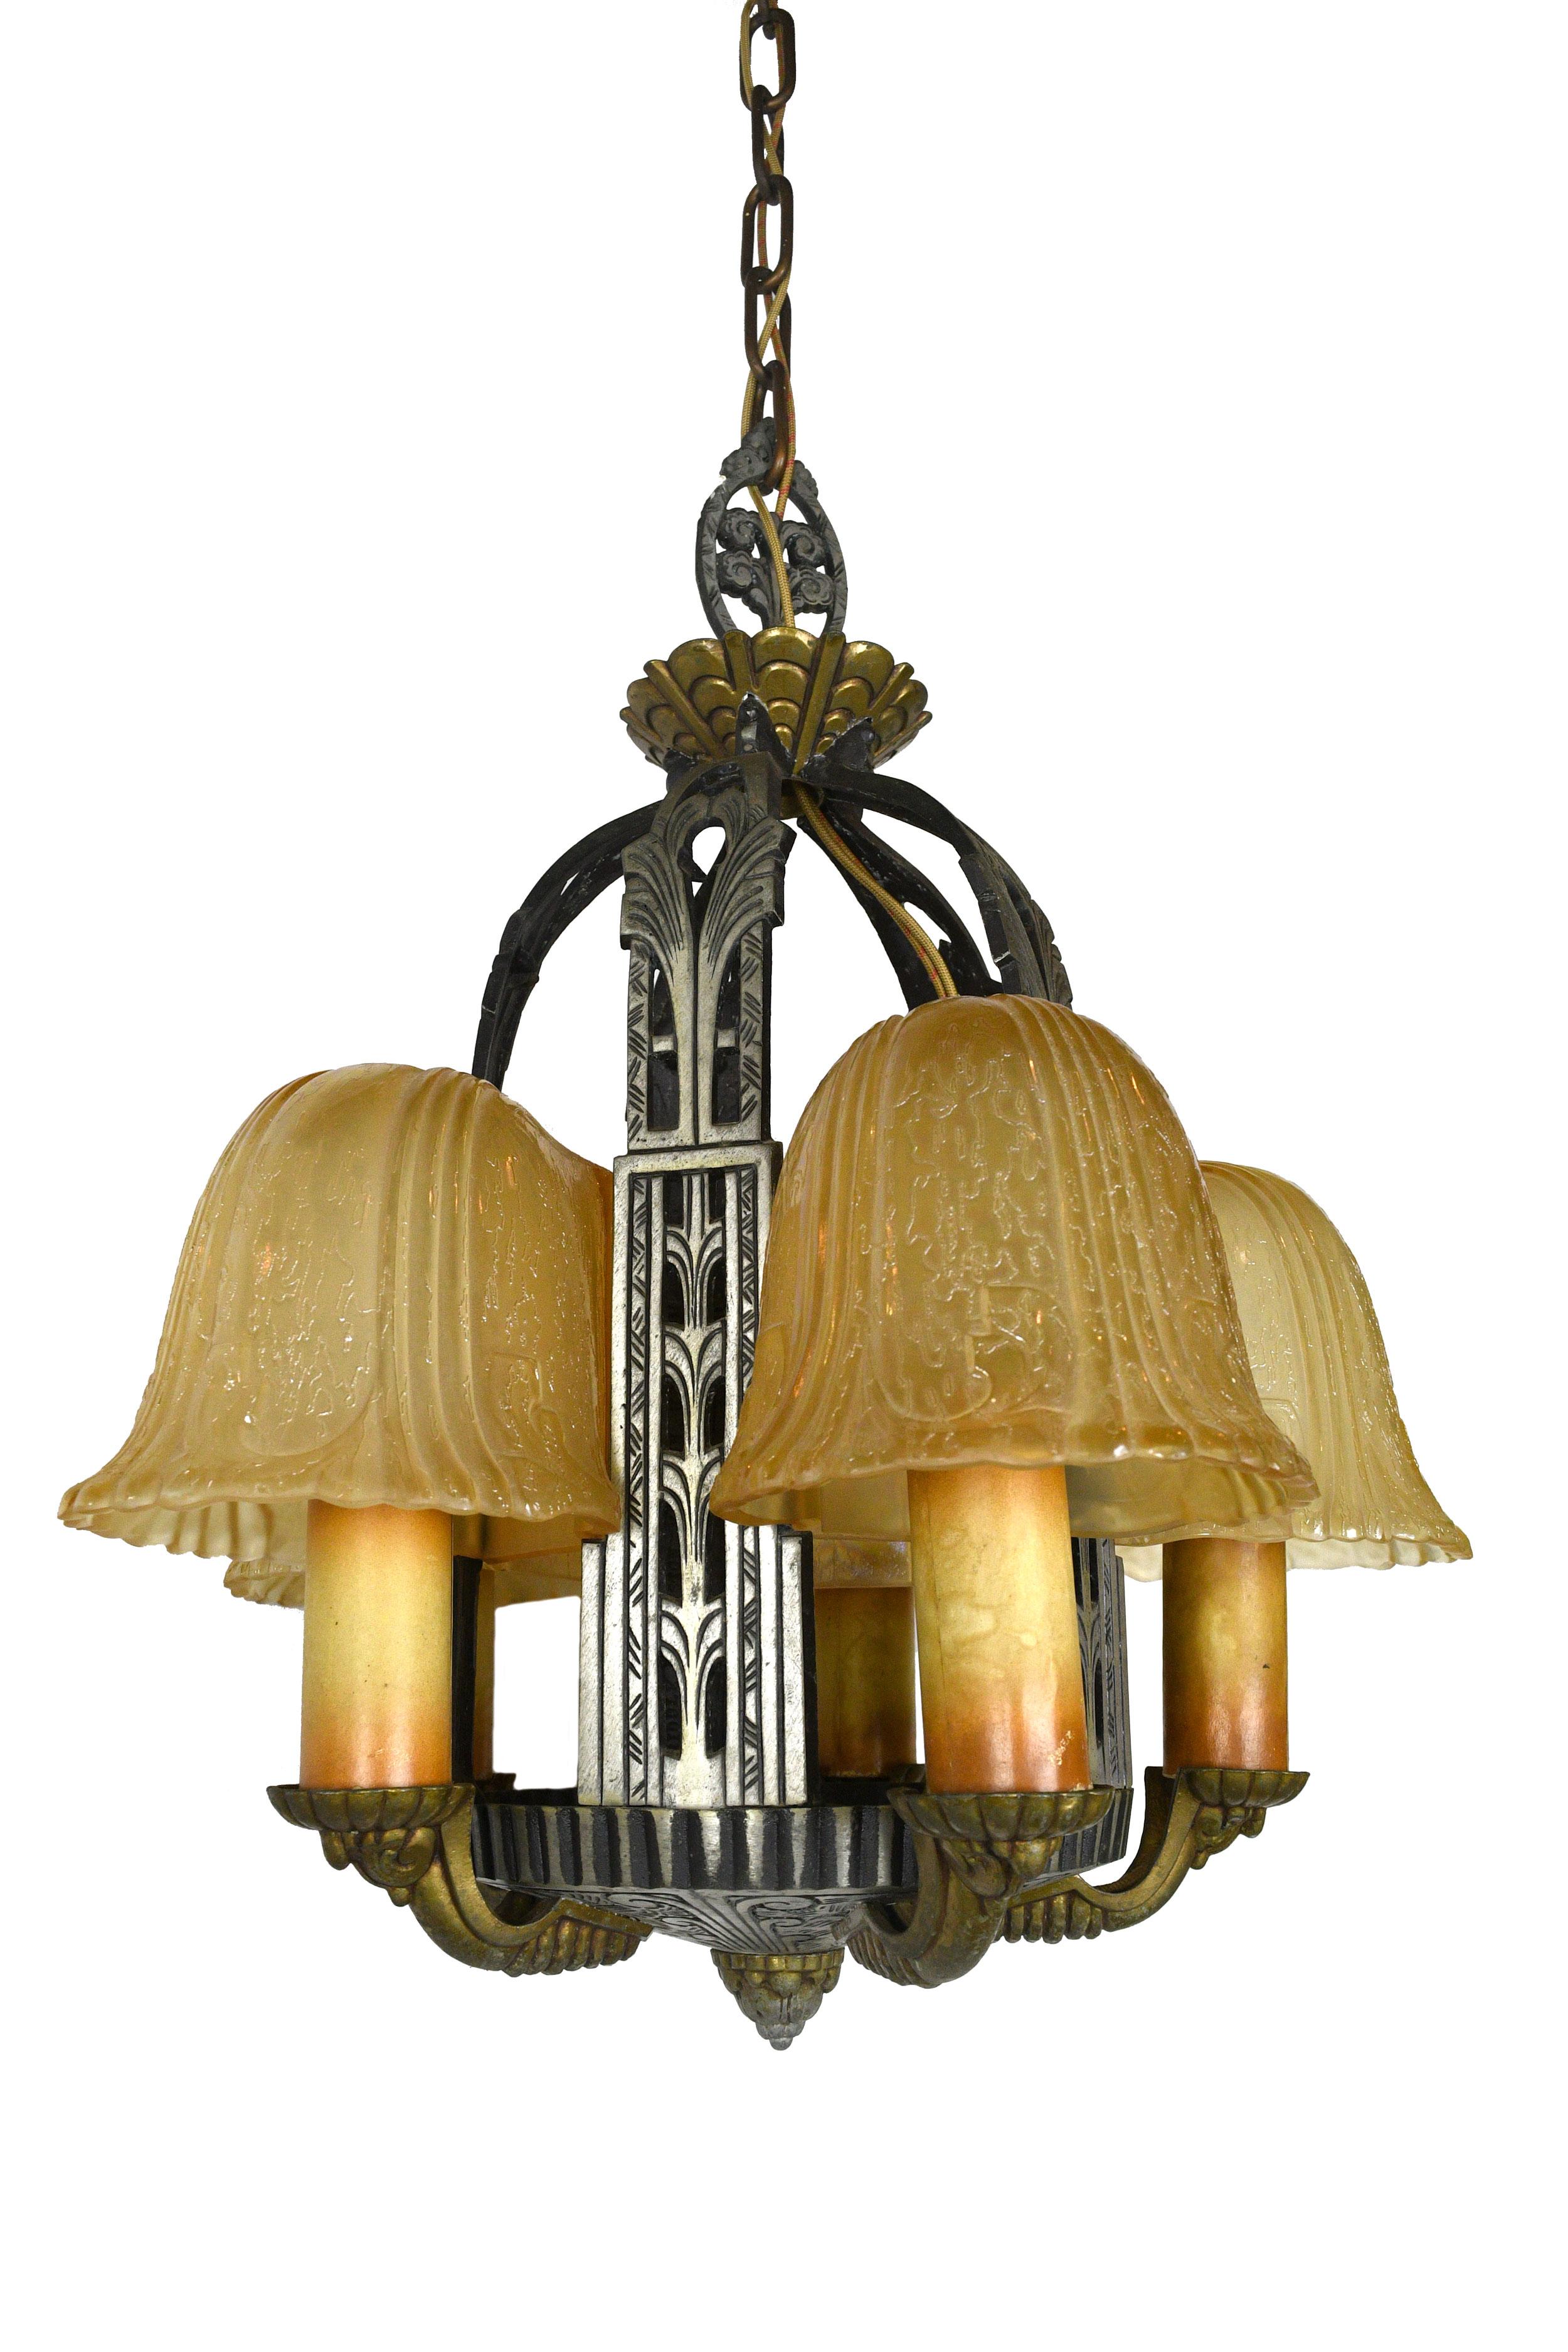 American Riddle Art Deco 5 Candle Slip Shade Chandelier For Sale